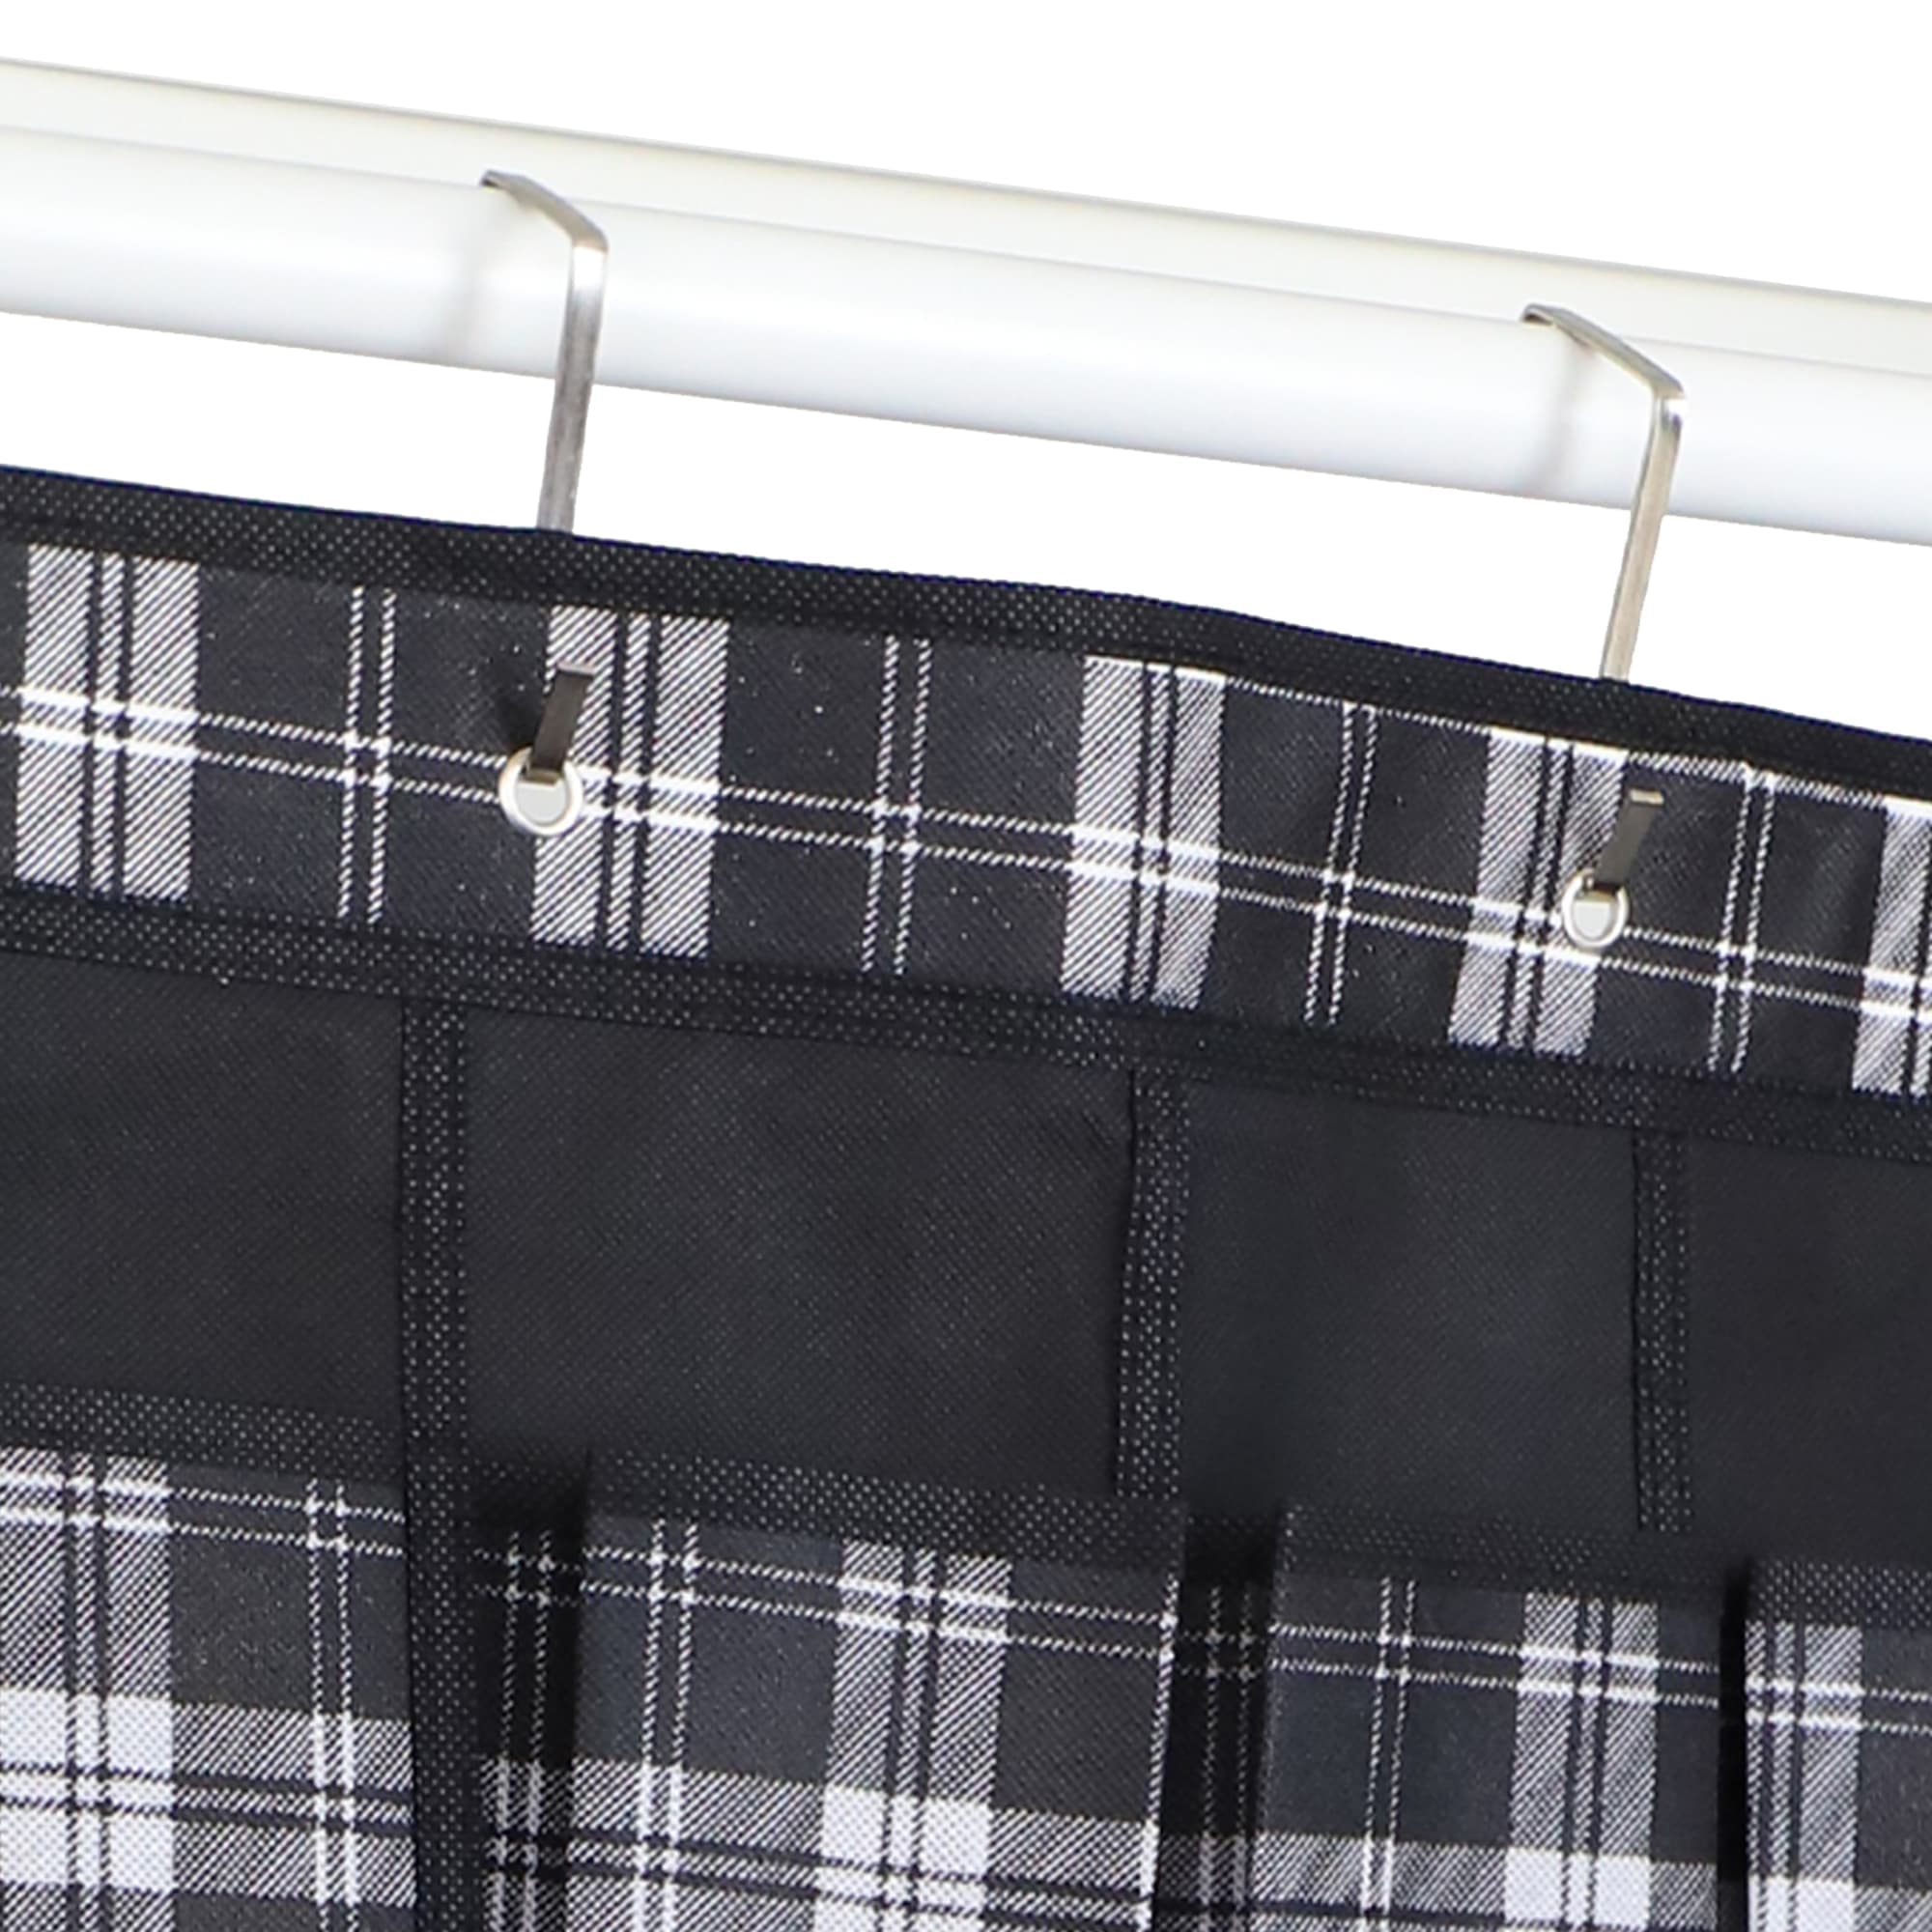 Home Basics Plaid 20 Pocket Non-Woven Over the Door Shoe Organizer, Black $5.00 EACH, CASE PACK OF 12